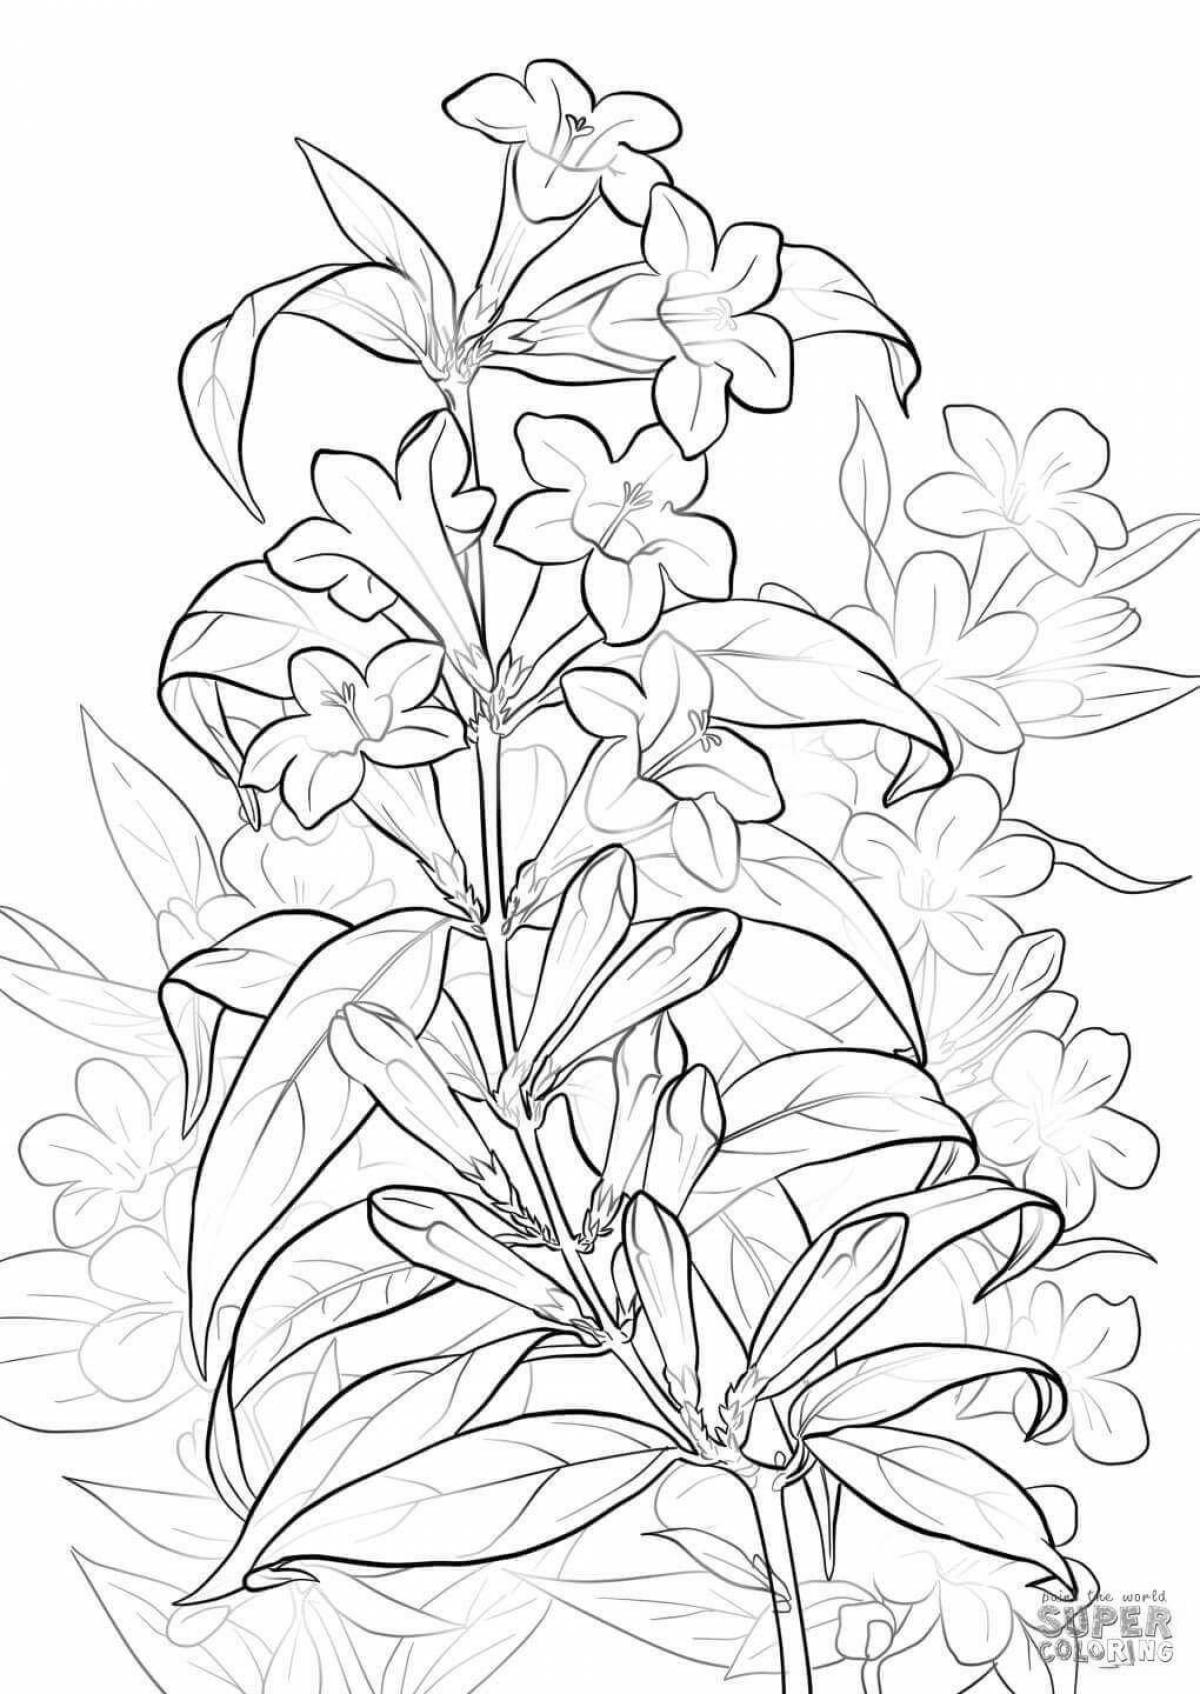 Coloring book magical forget-me-not flower